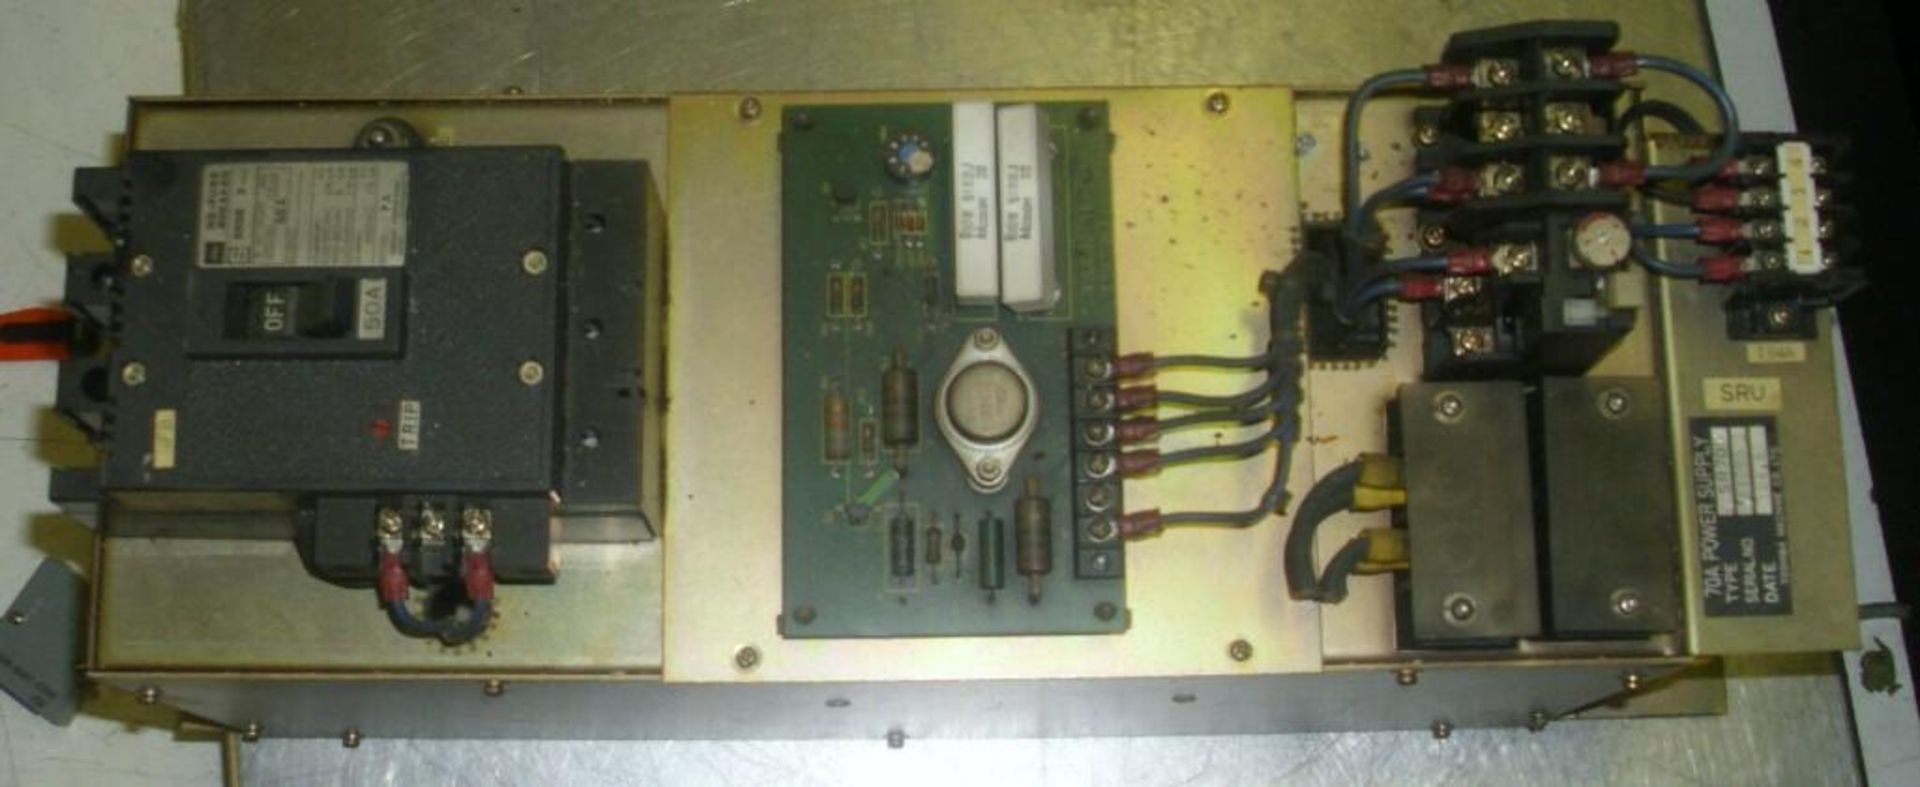 Toshiba / Tosnuc 70A Power Supply SR700 - Image 5 of 6